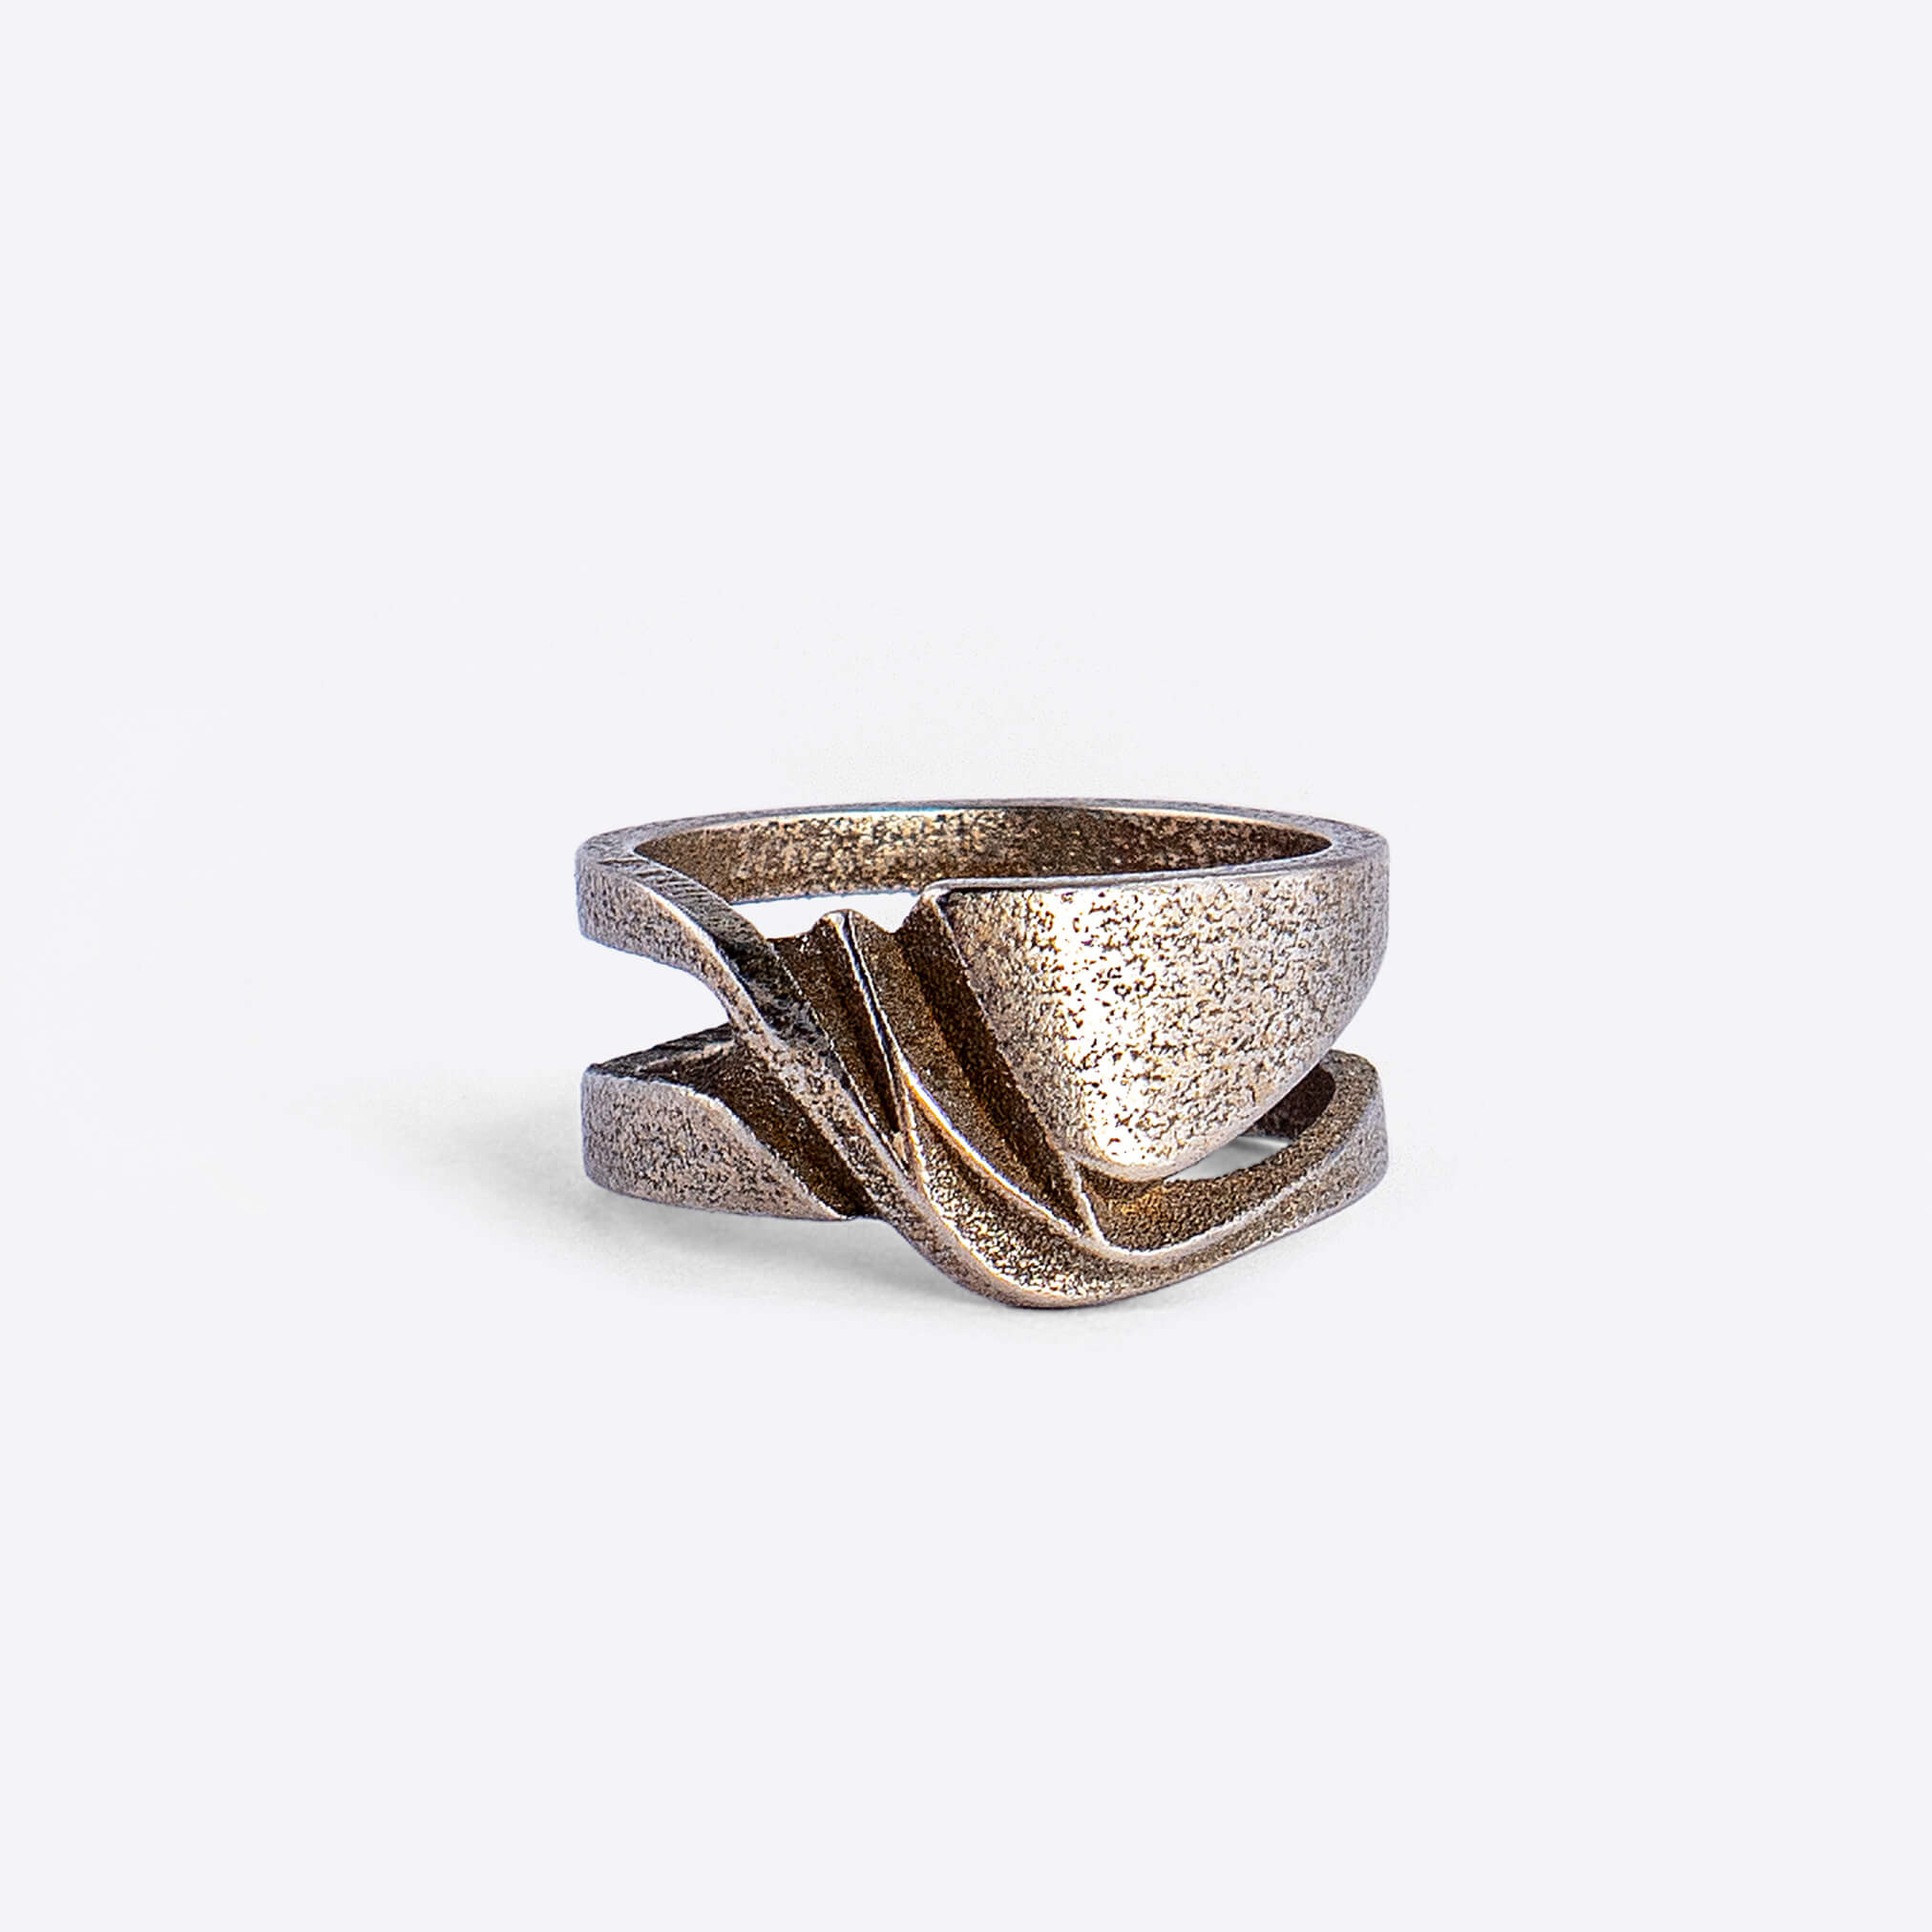 Velum Steel Ring – LACE by JennyWu